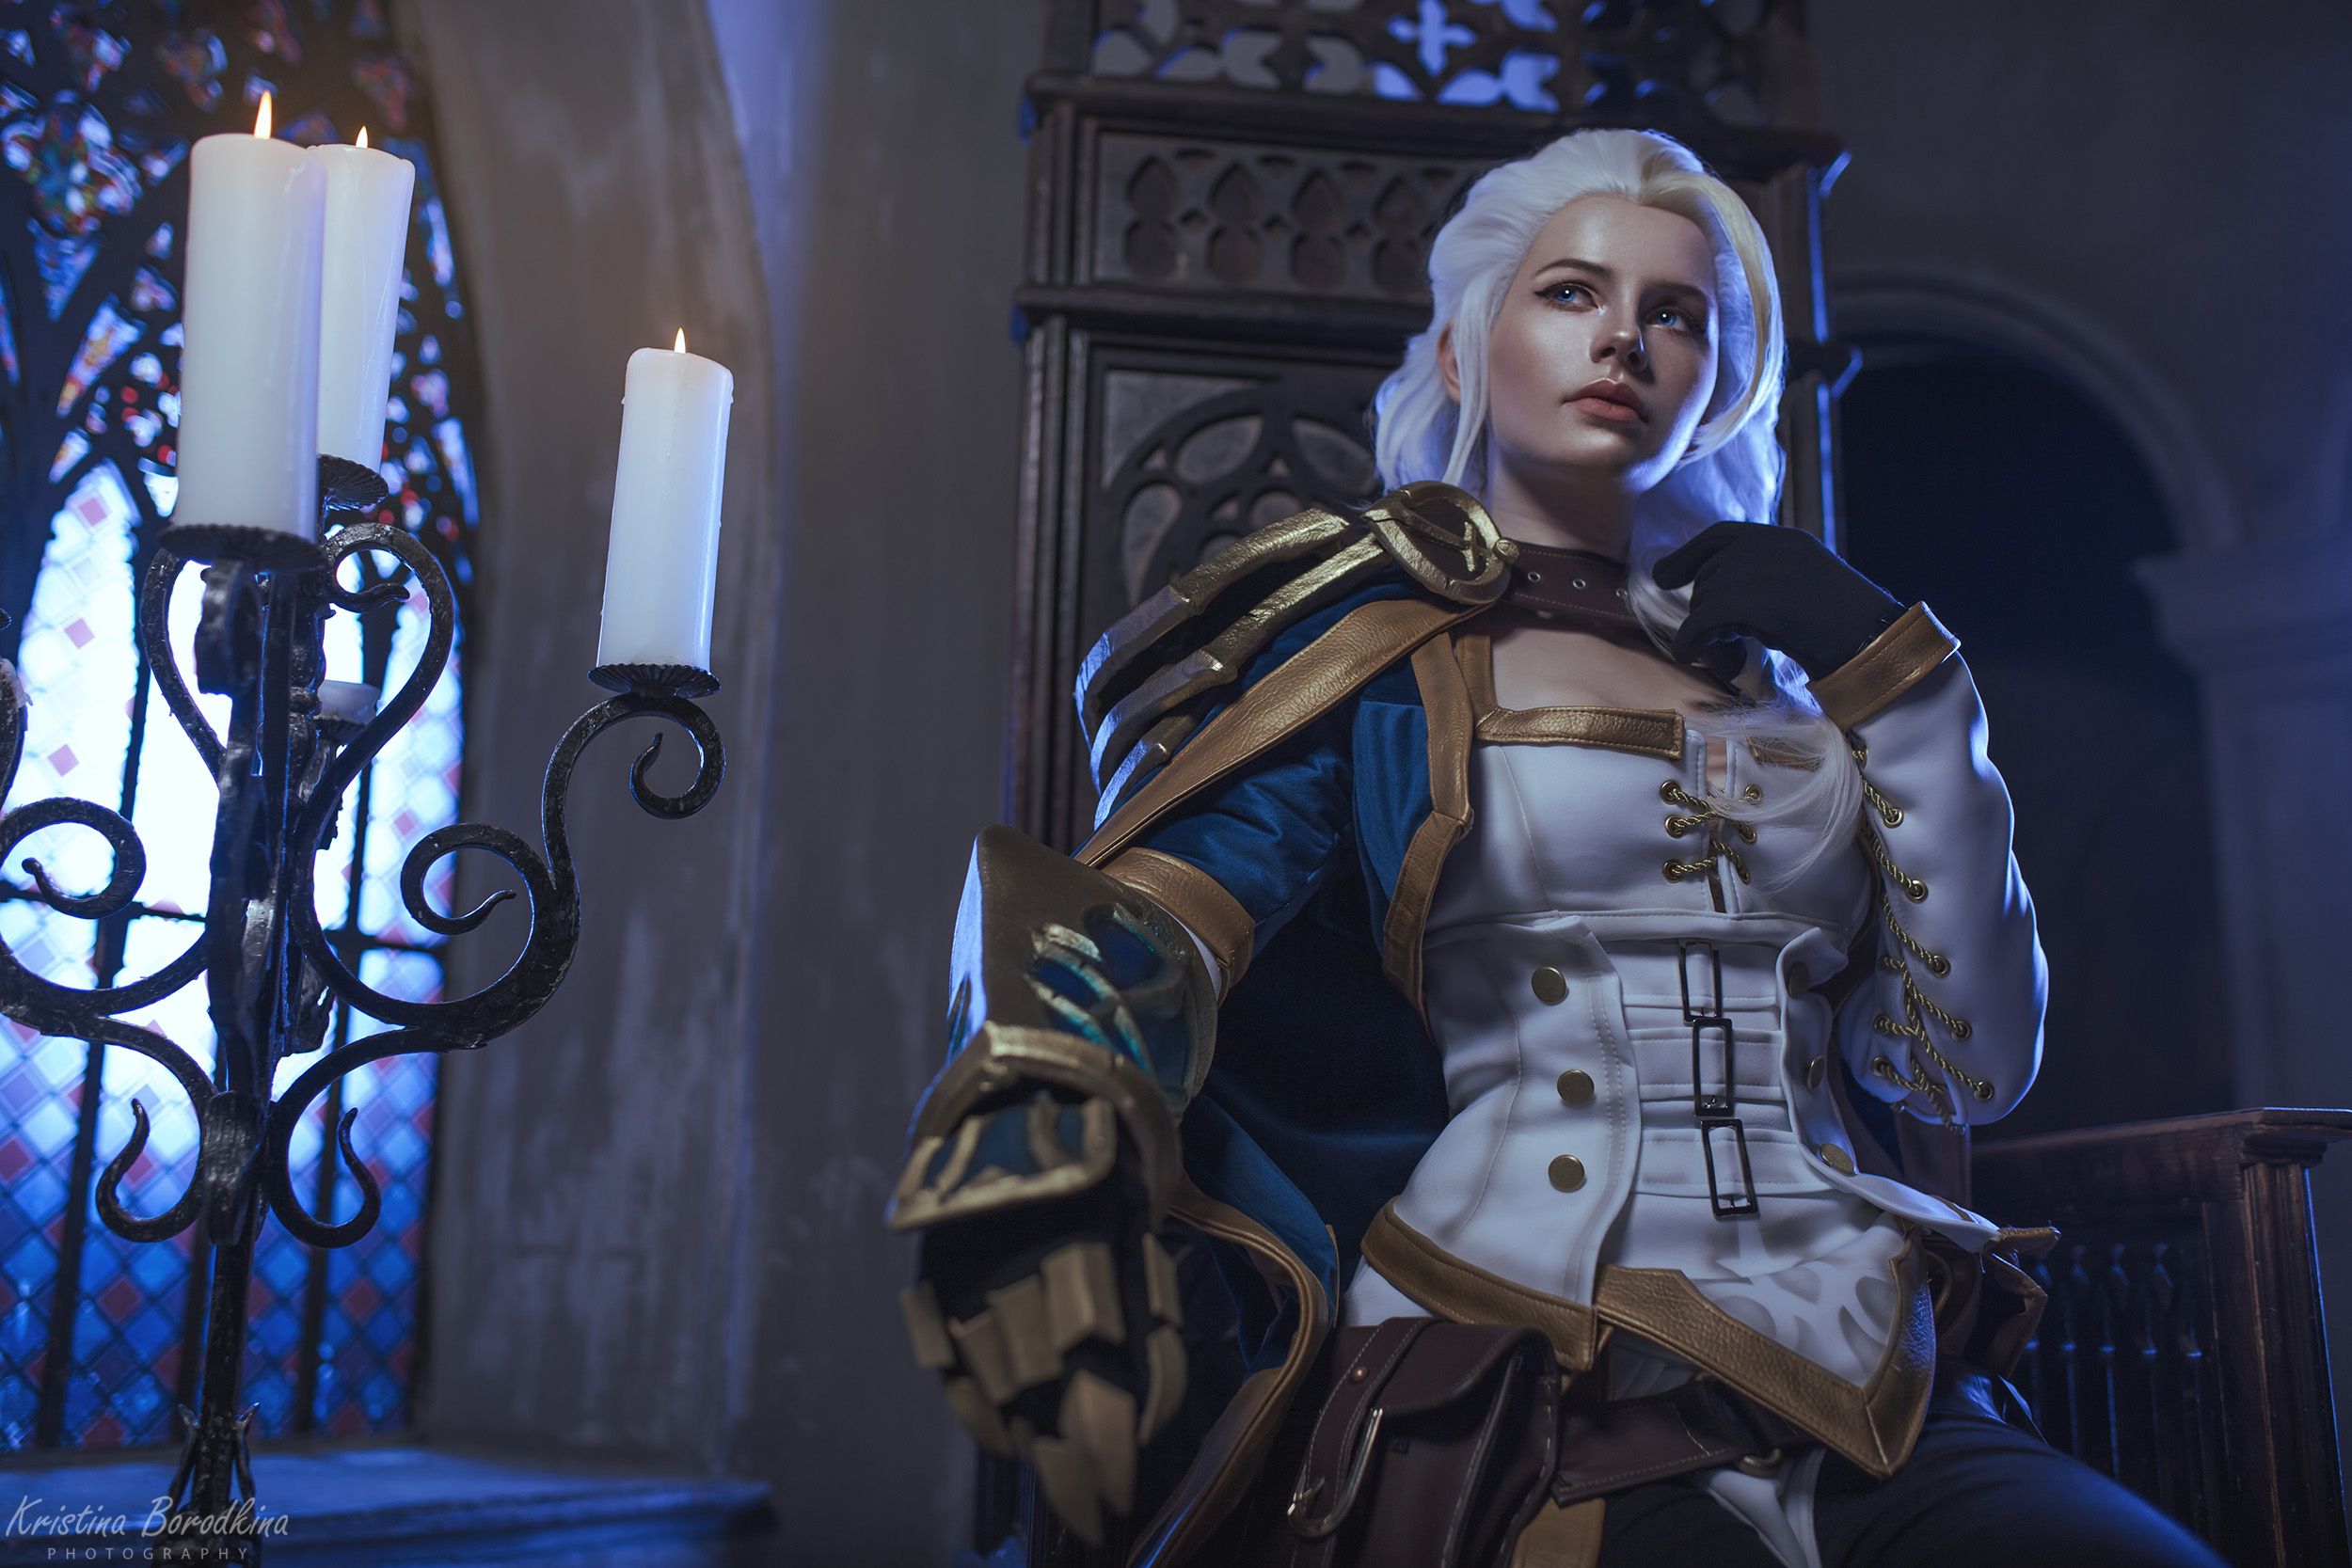 People 2500x1667 Jaina Proudmoore Warcraft Warcraft III World of Warcraft video games video game characters women white hair portrait armor sorceress candles church blue eyes looking away indoors fantasy girl women indoors Kristina Borodkina Blizzard Entertainment model Russian women Russian